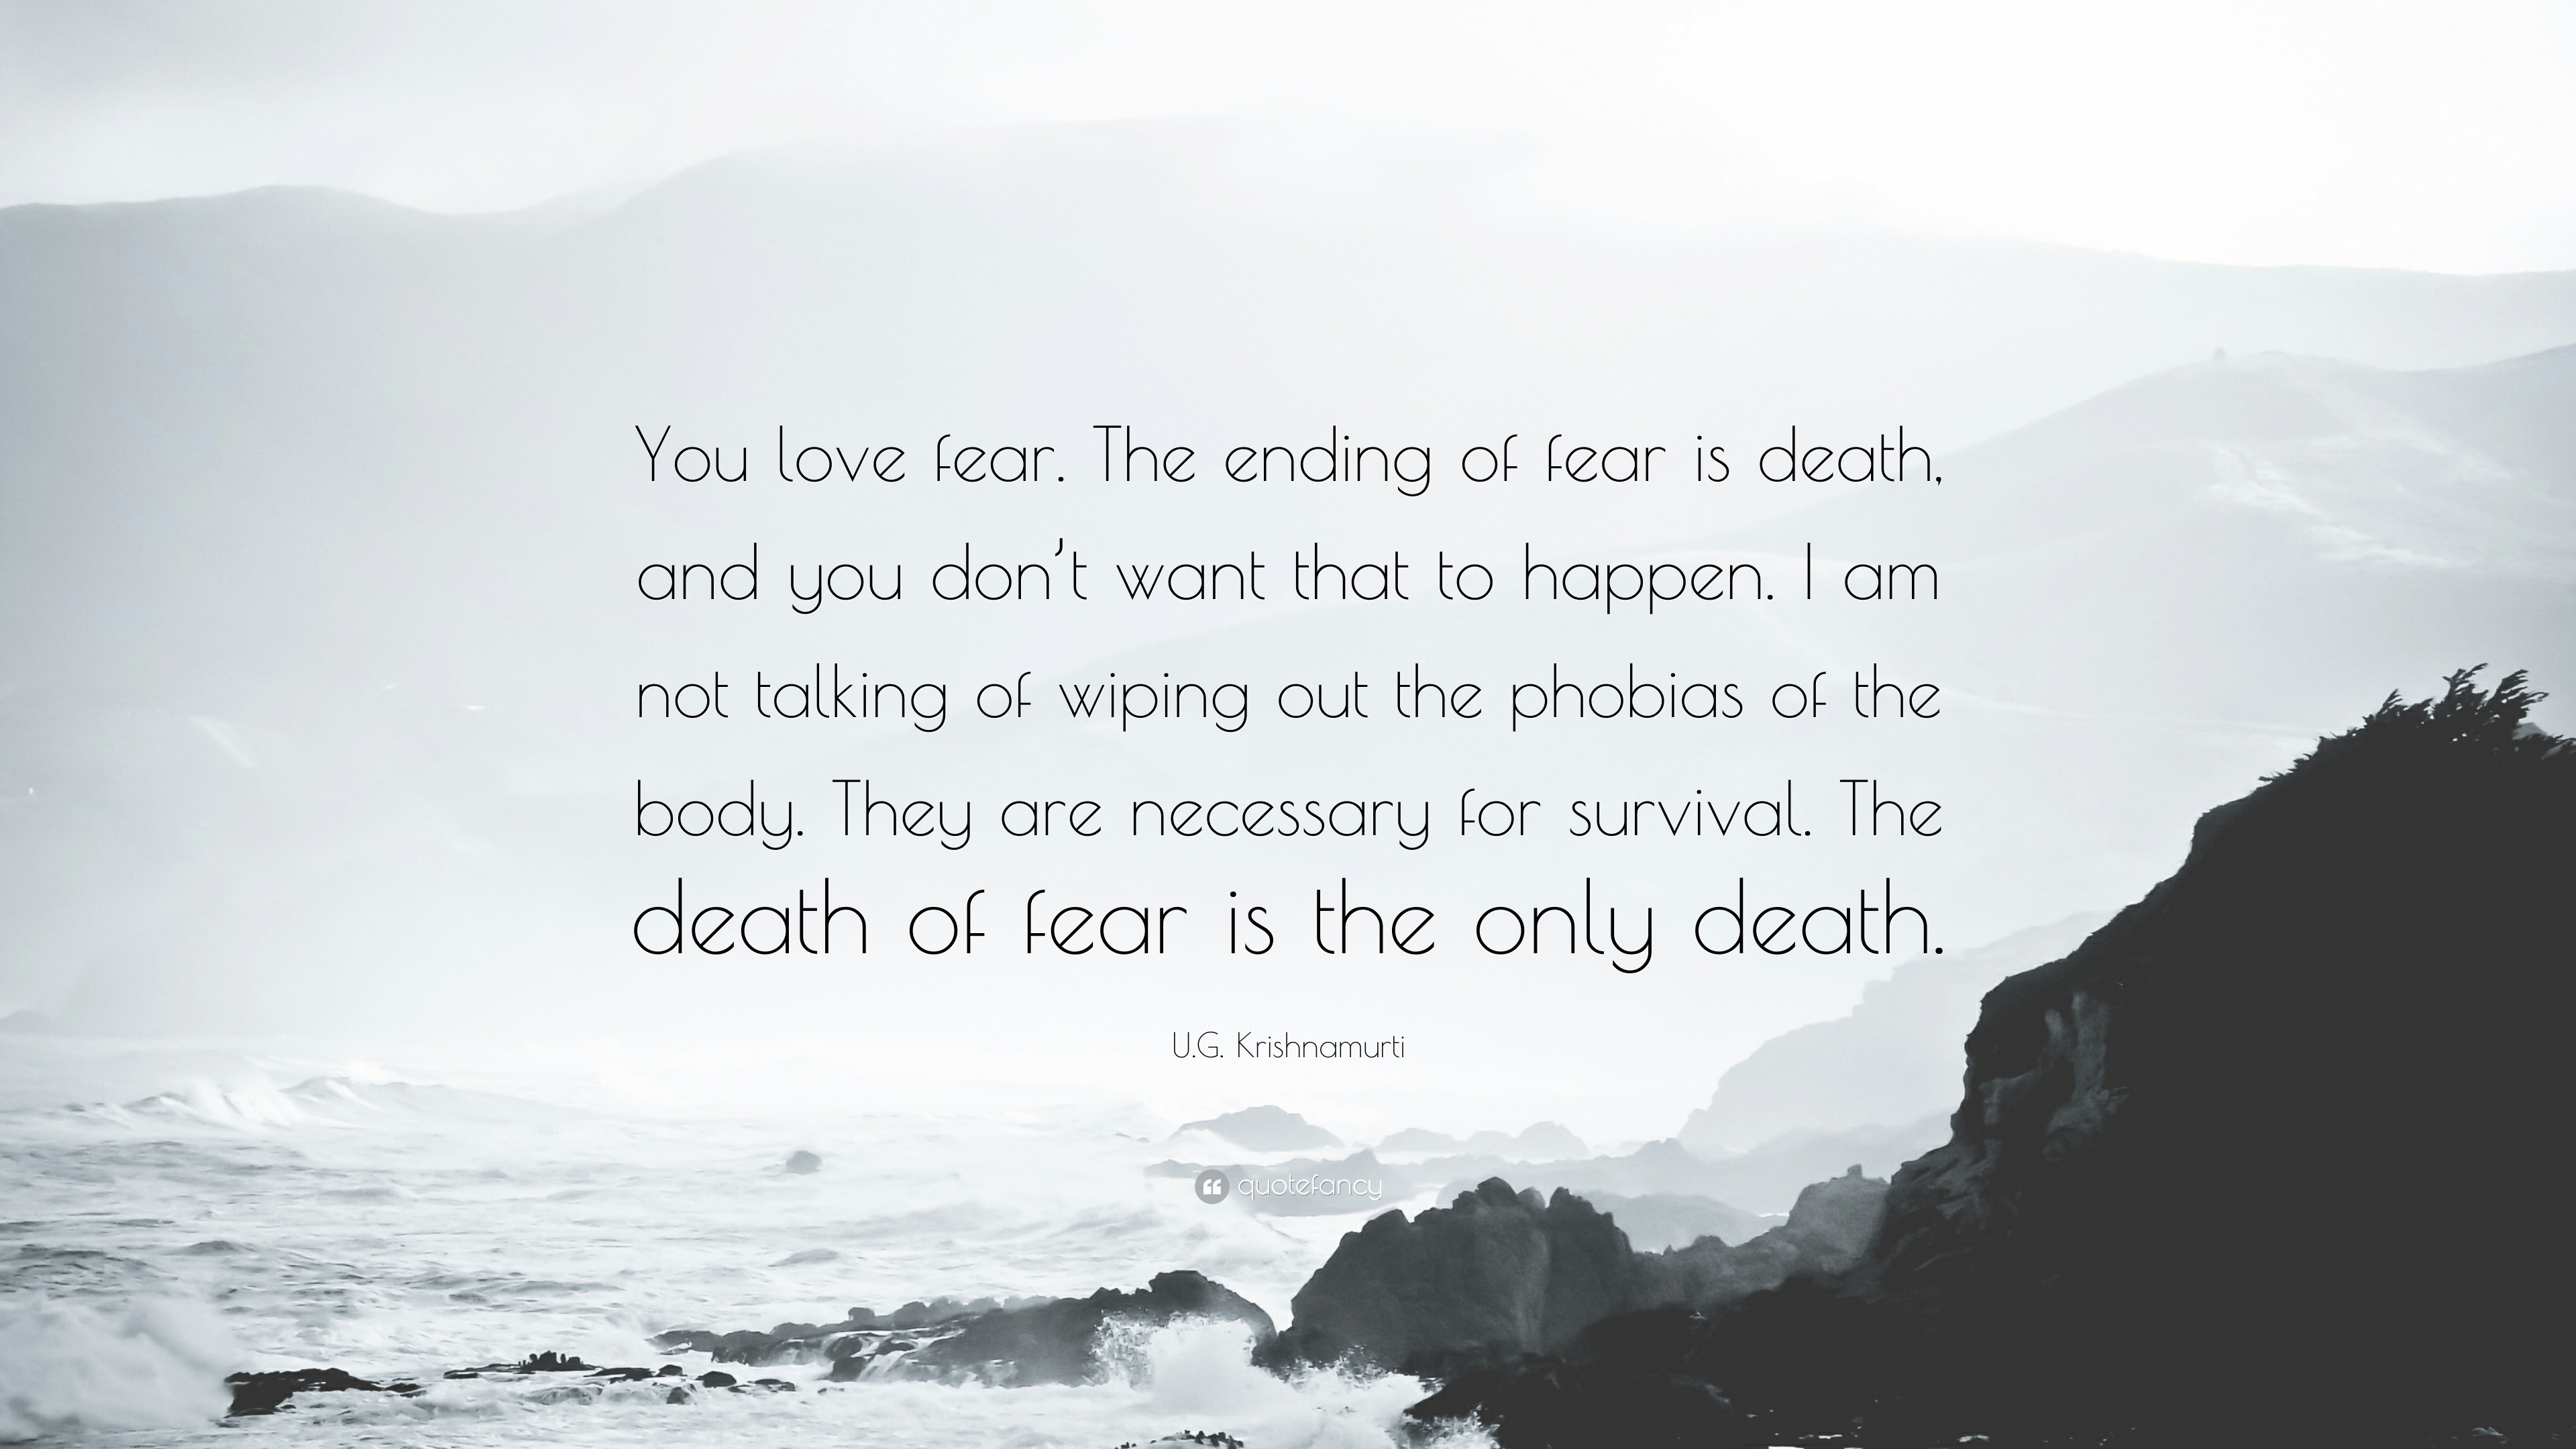 U G Krishnamurti Quote “You love fear The ending of fear is